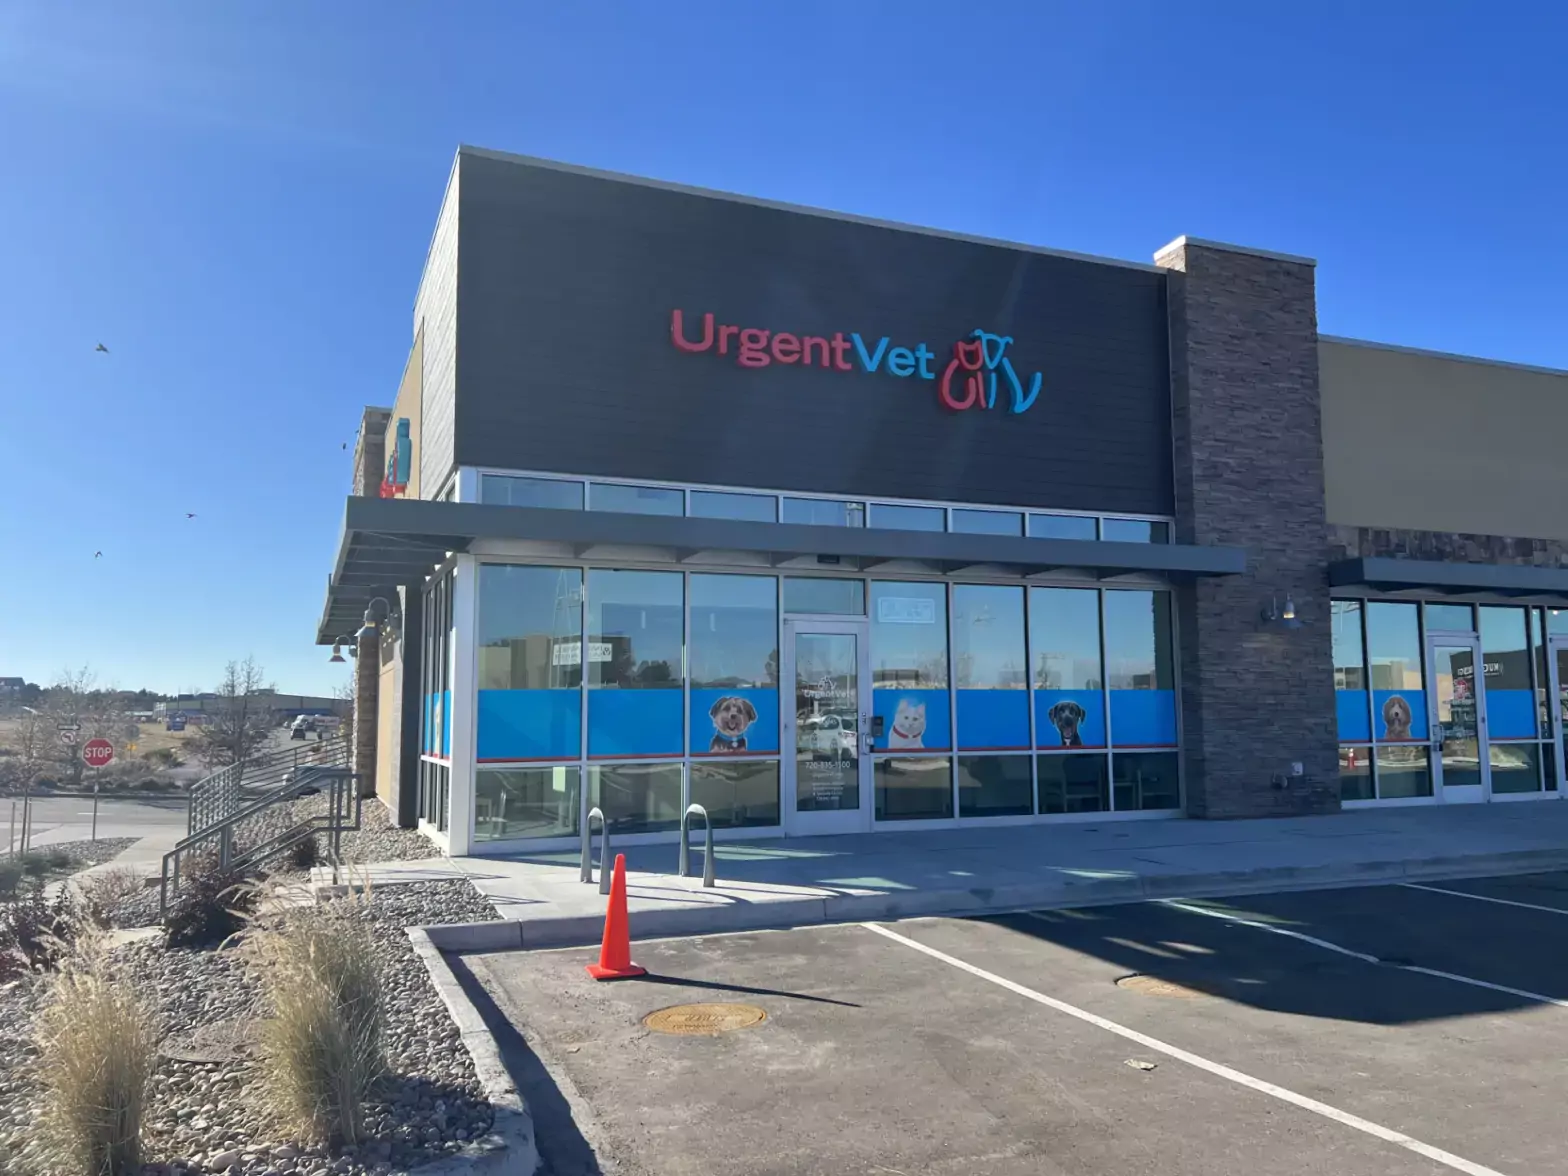 Featured image for post: After-Hours Pet Care Options in Denver Expand with Two Additions of UrgentVet